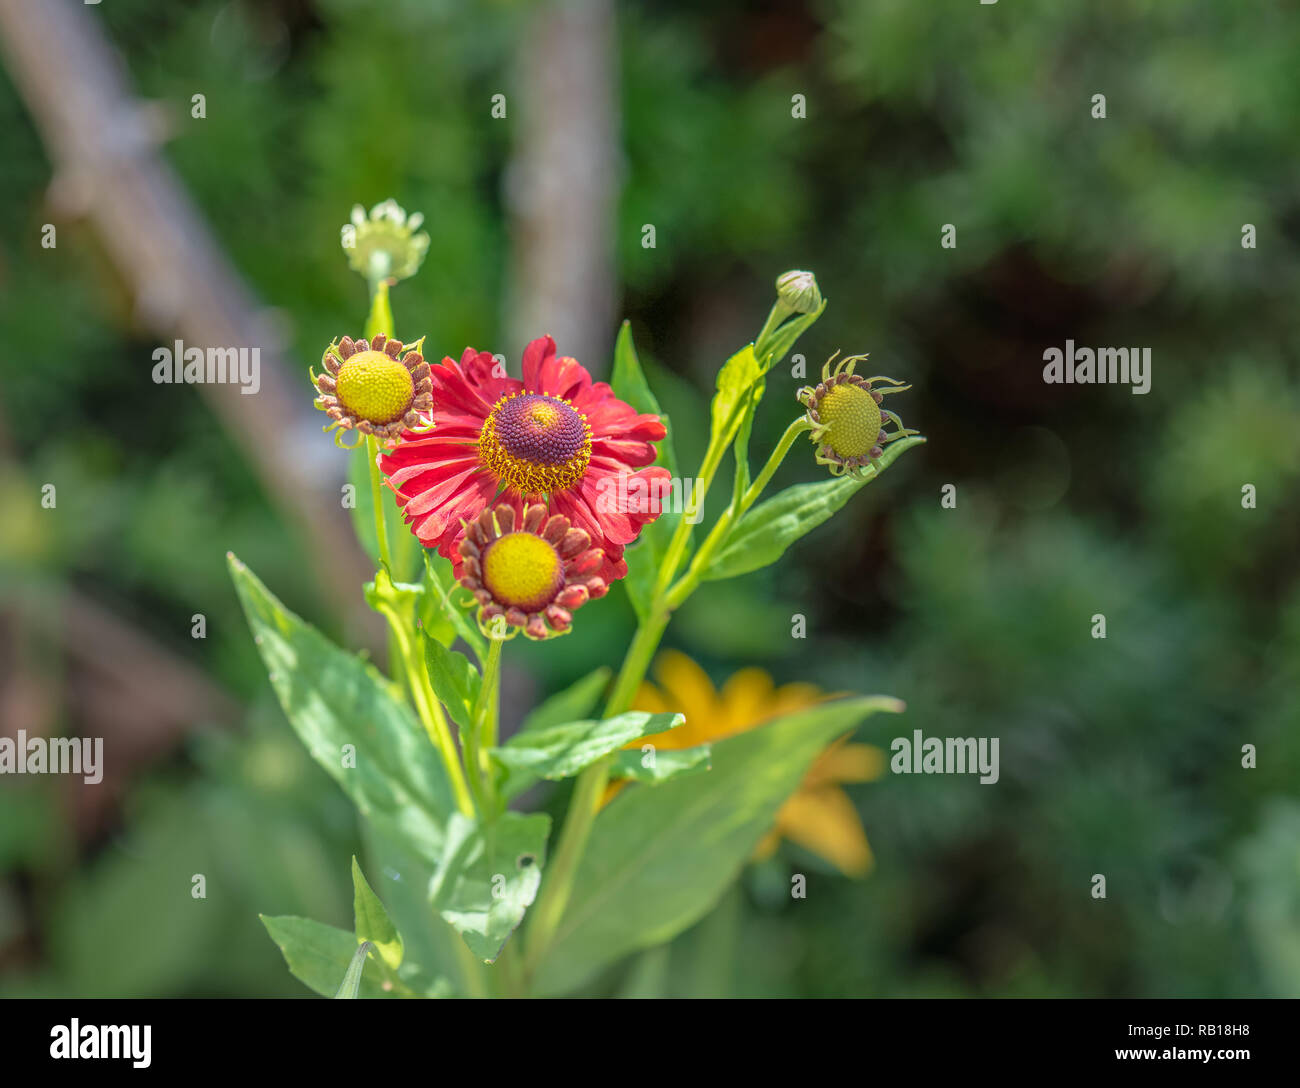 Natural floral colorful outdoor macro of a stem of  yellow red helenium / bride of the sun blossoms,buds,blurred green backgroumd,sunny summer Stock Photo